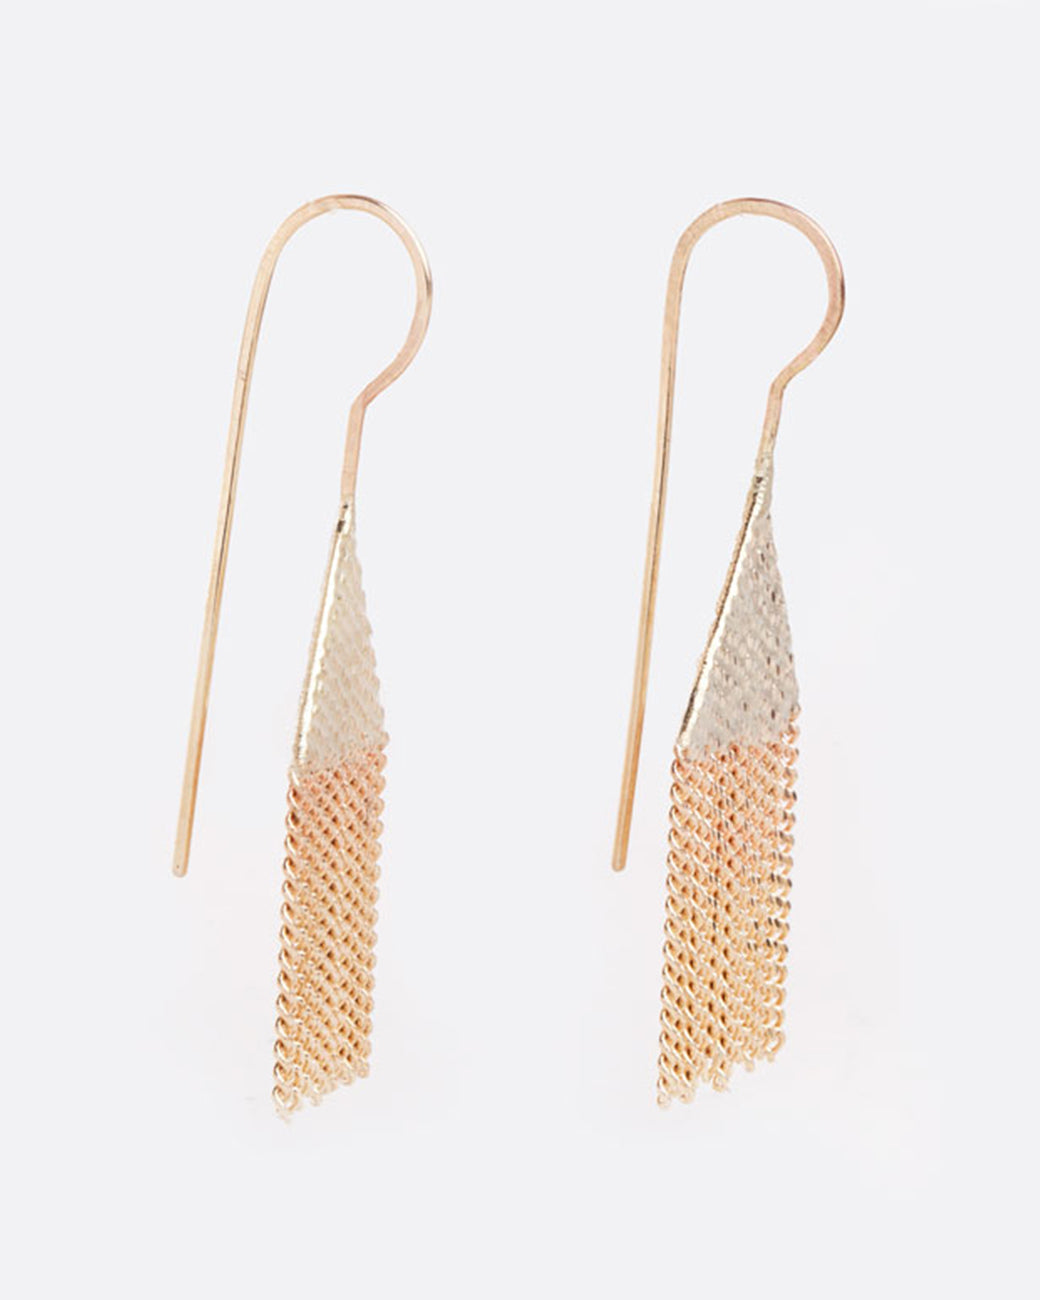 Triangular chain earrings with fringe drops, shown from the side.